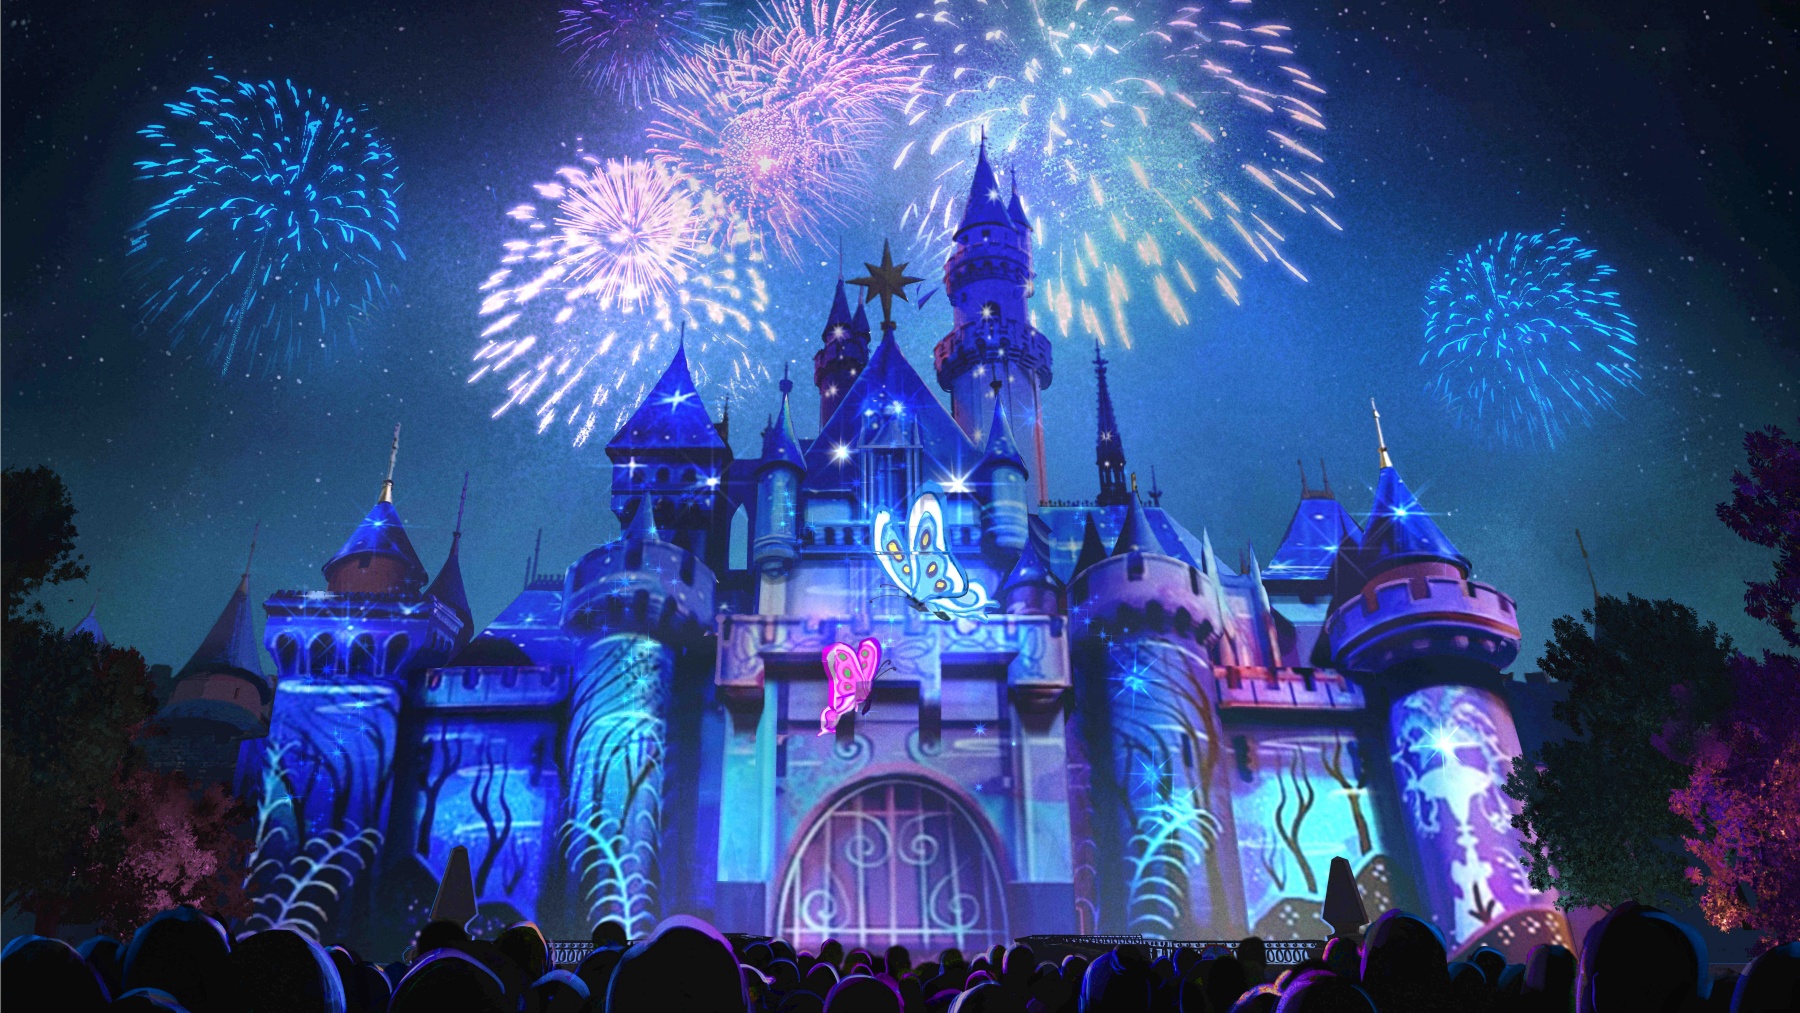 Disney 100 Years of Wonder to Open at Disneyland in Early 2023